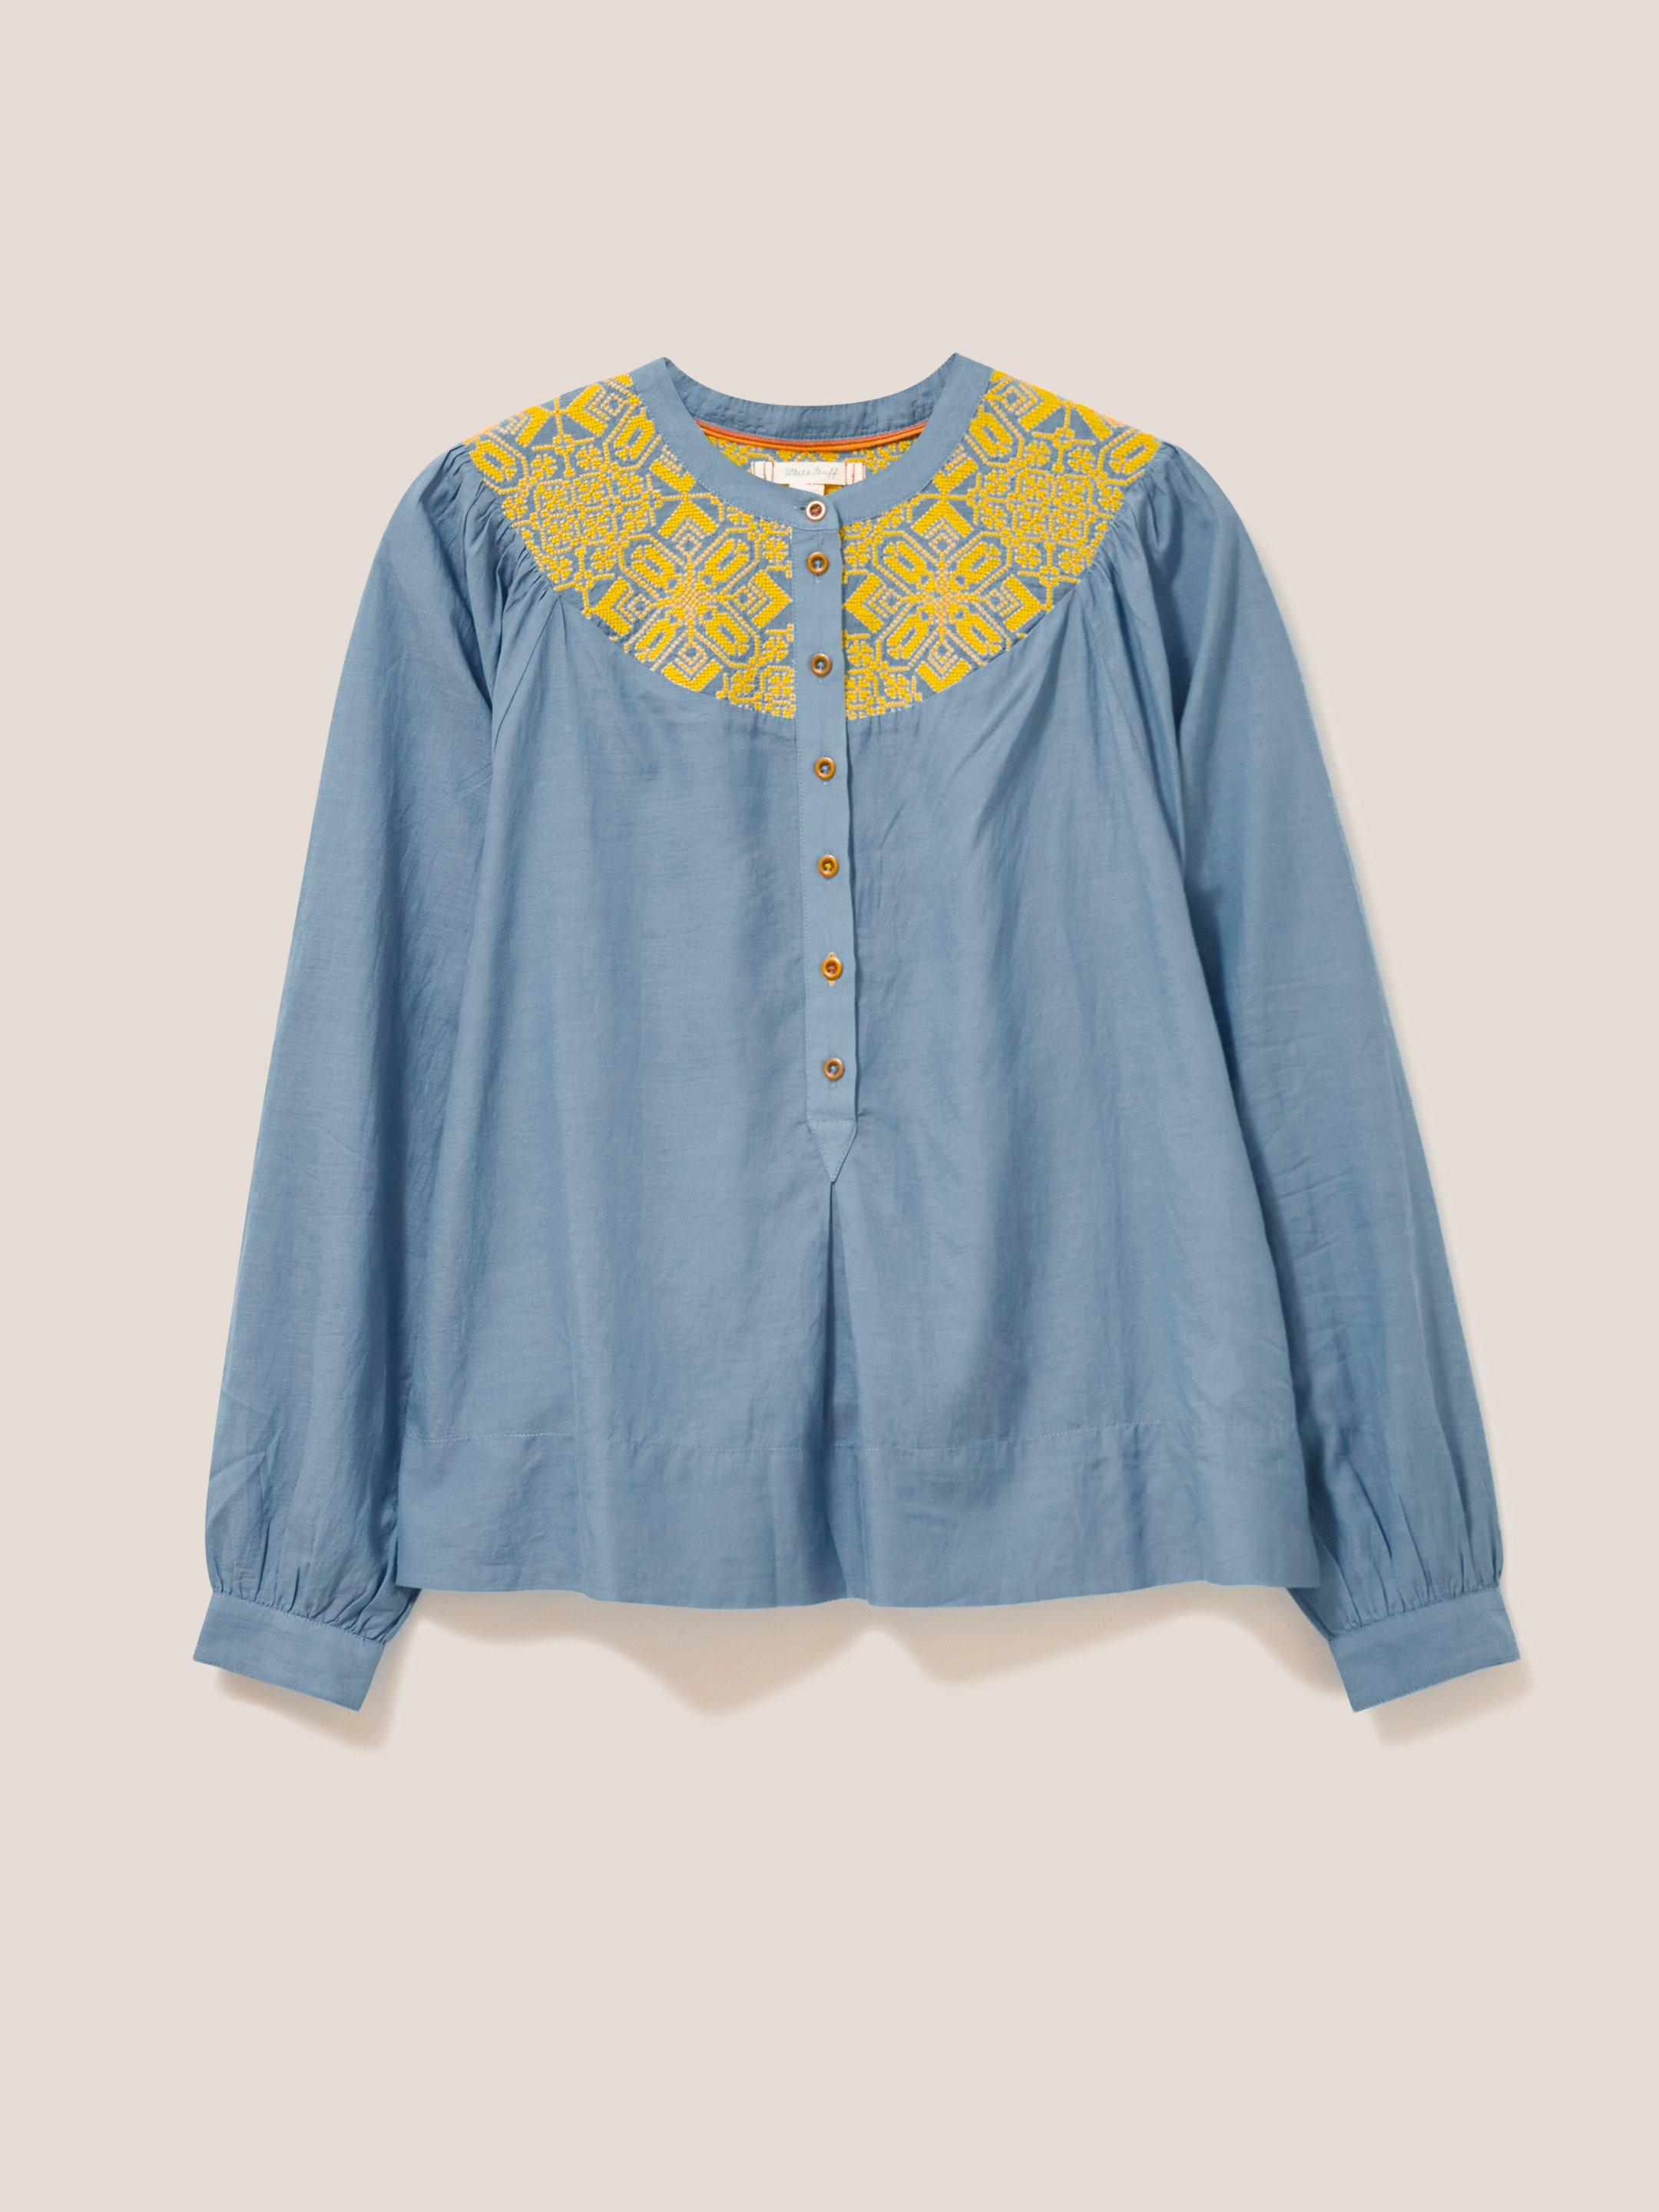 ROSE EMBROIDERED TOP in BLUE MLT - FLAT FRONT